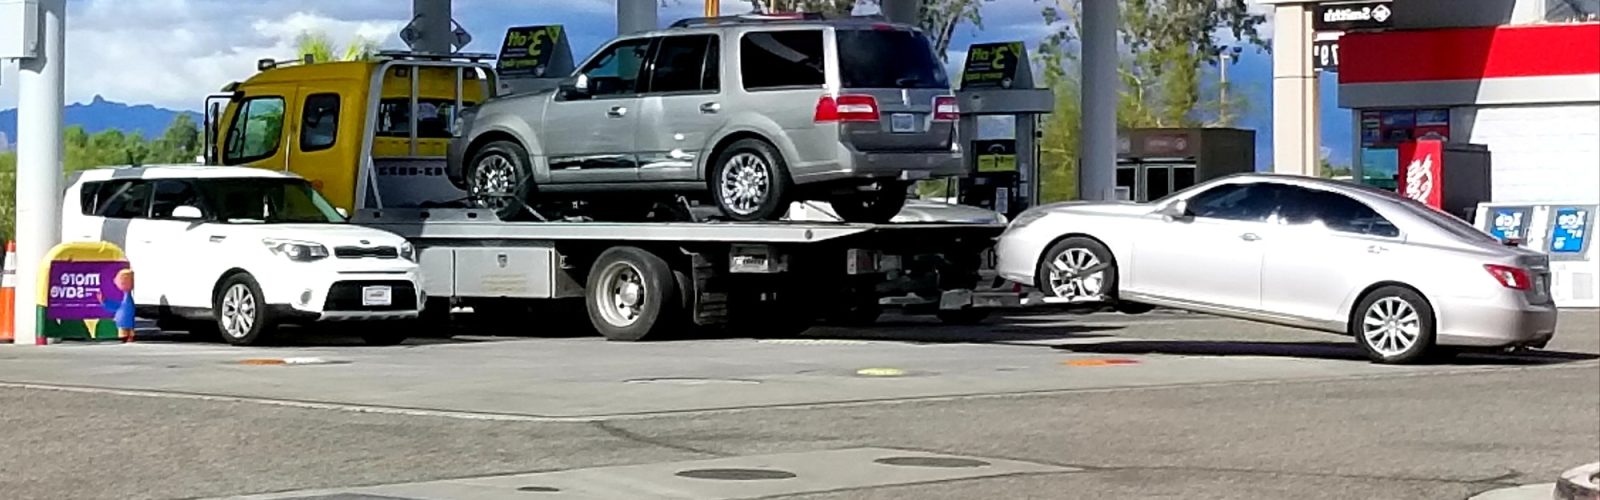 Choosing the Best Towing Service Near Me with Discount Auto Towing Gas and Oil! Towing Vehicles and Getting Diesel Fuel!